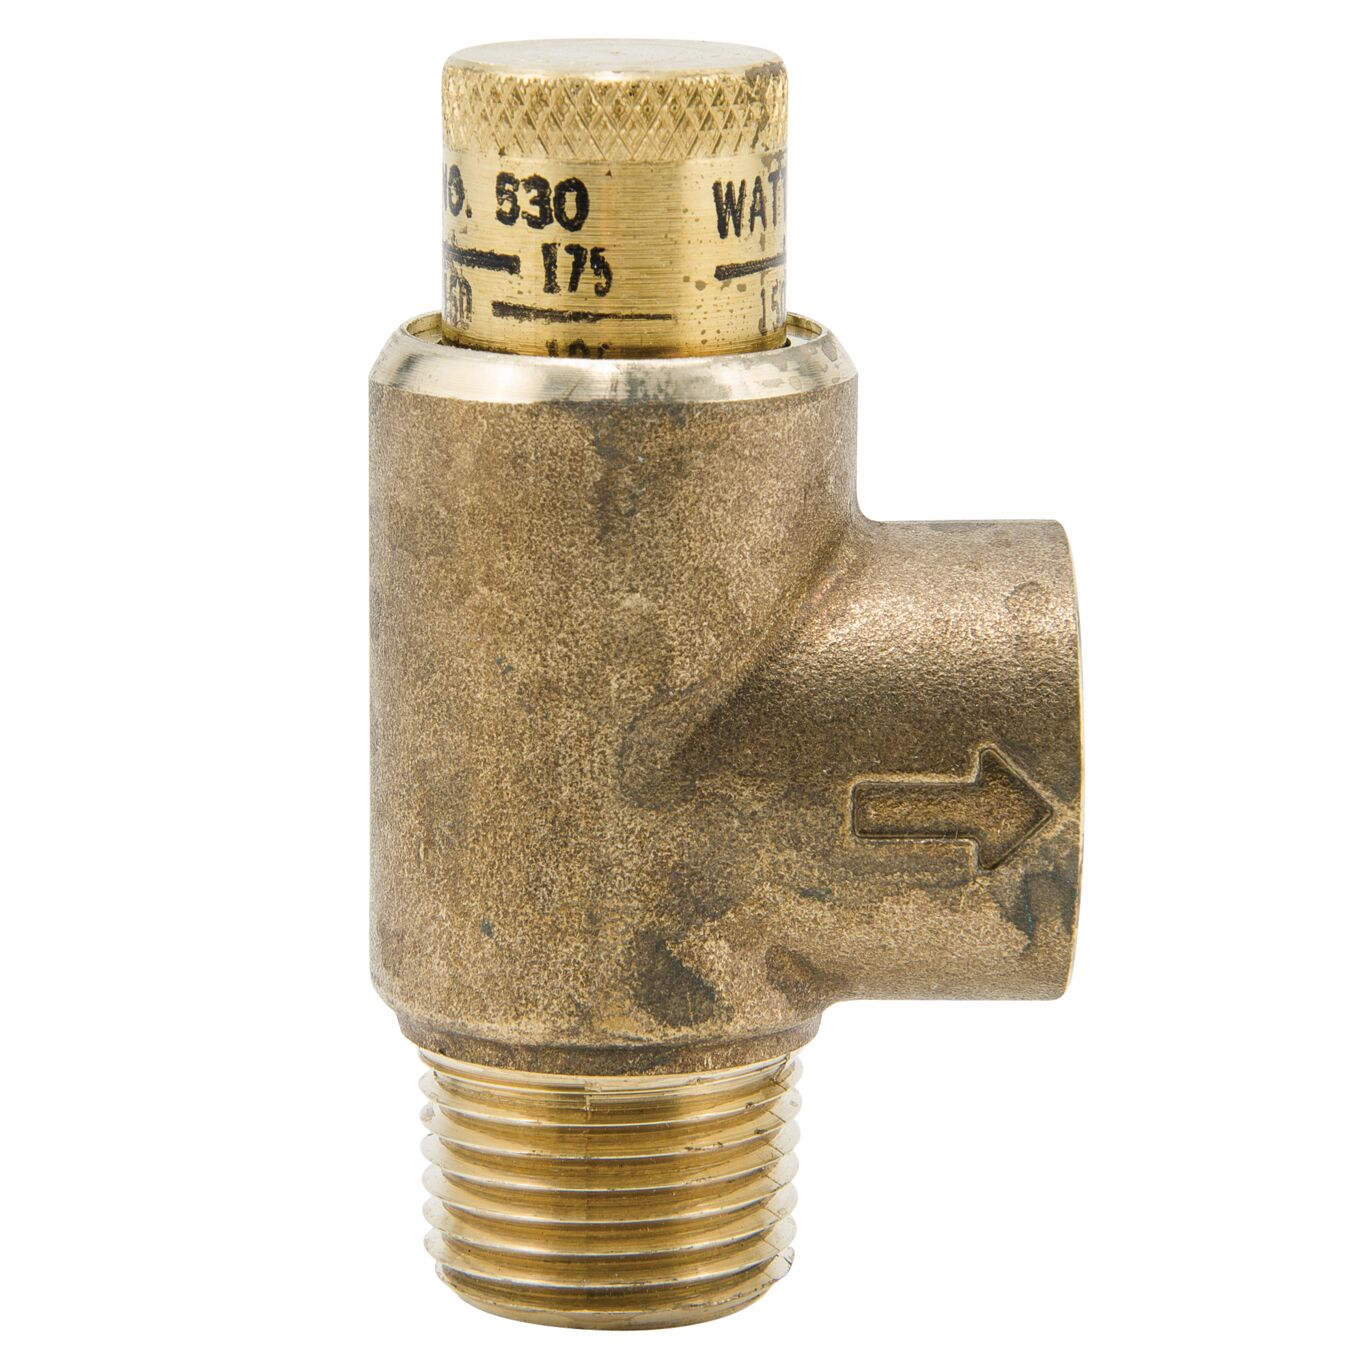 Calibrated Adjustable Pressure Relief Valve Watts LF530C 1/2" Lead Free 50-175Ps 